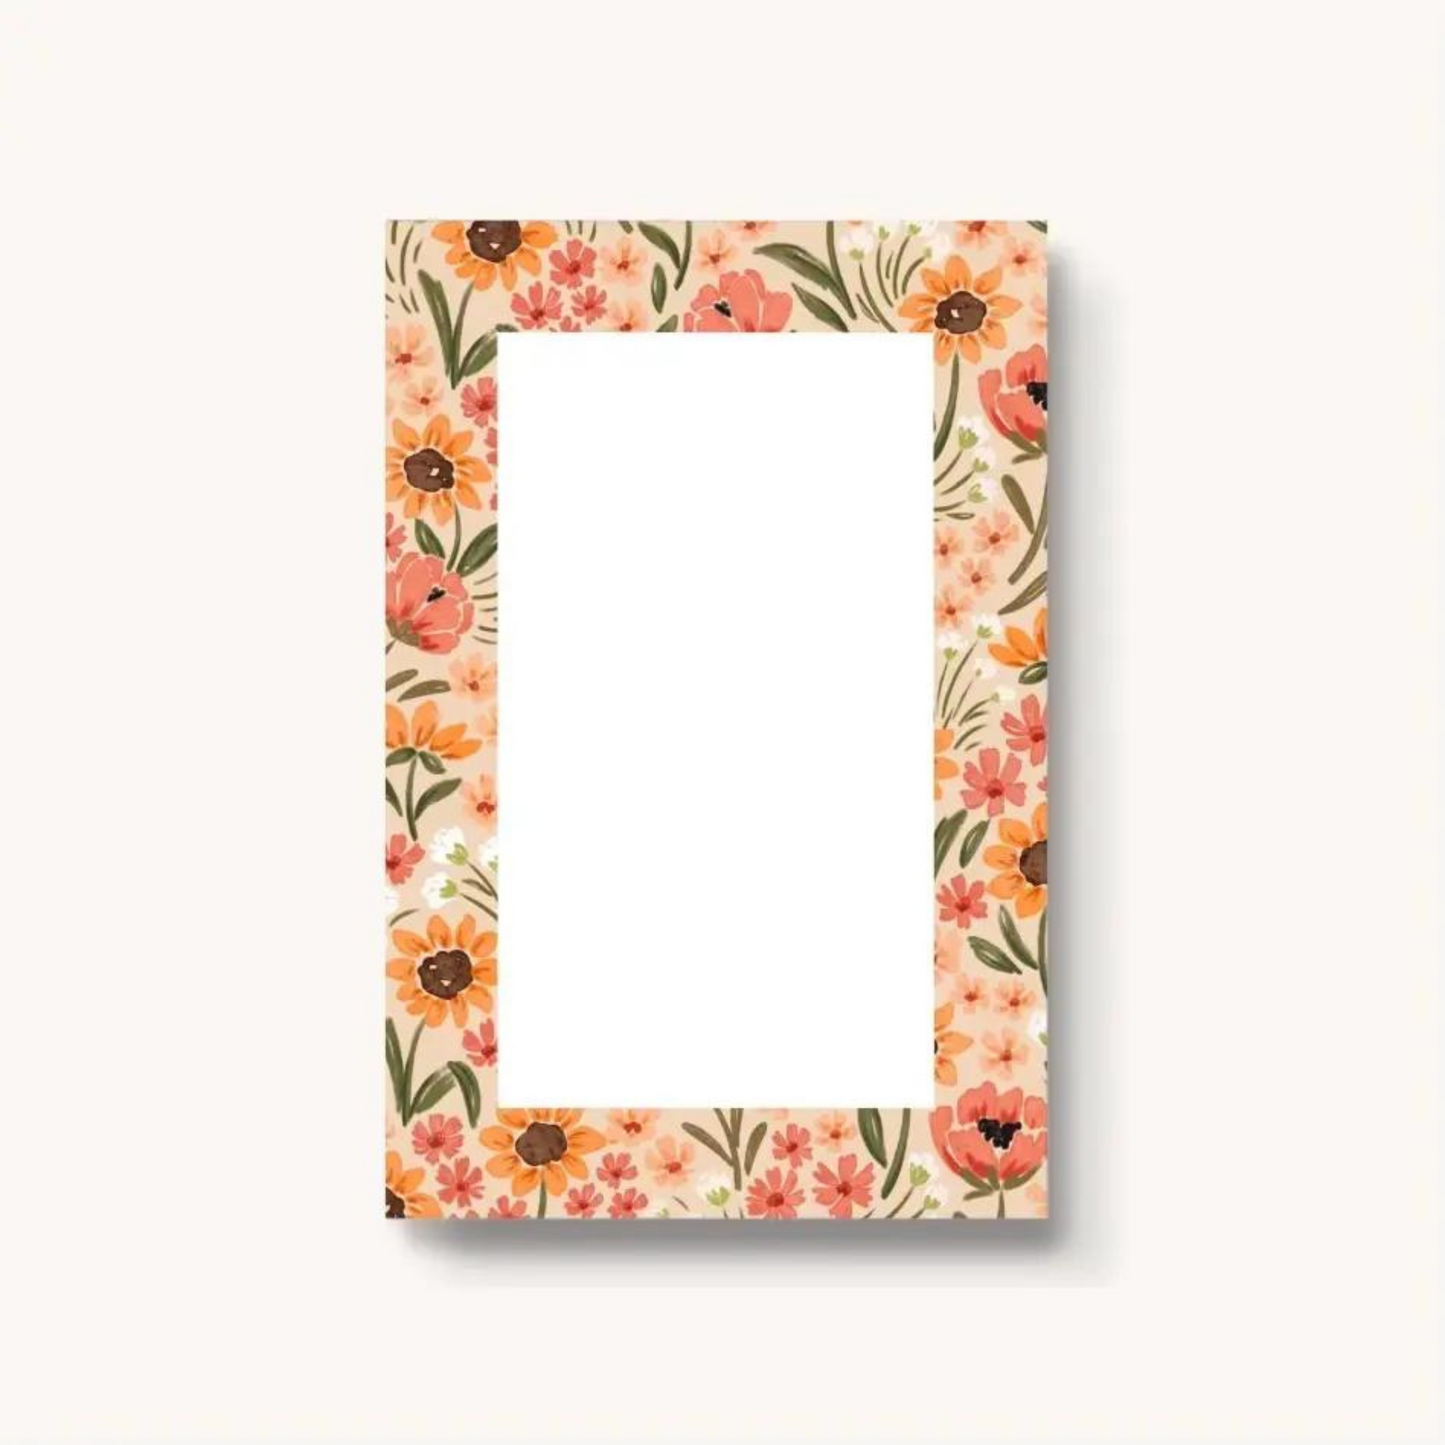 Organize your day in style with Cute Notepads - functional, fashionable, and fun!